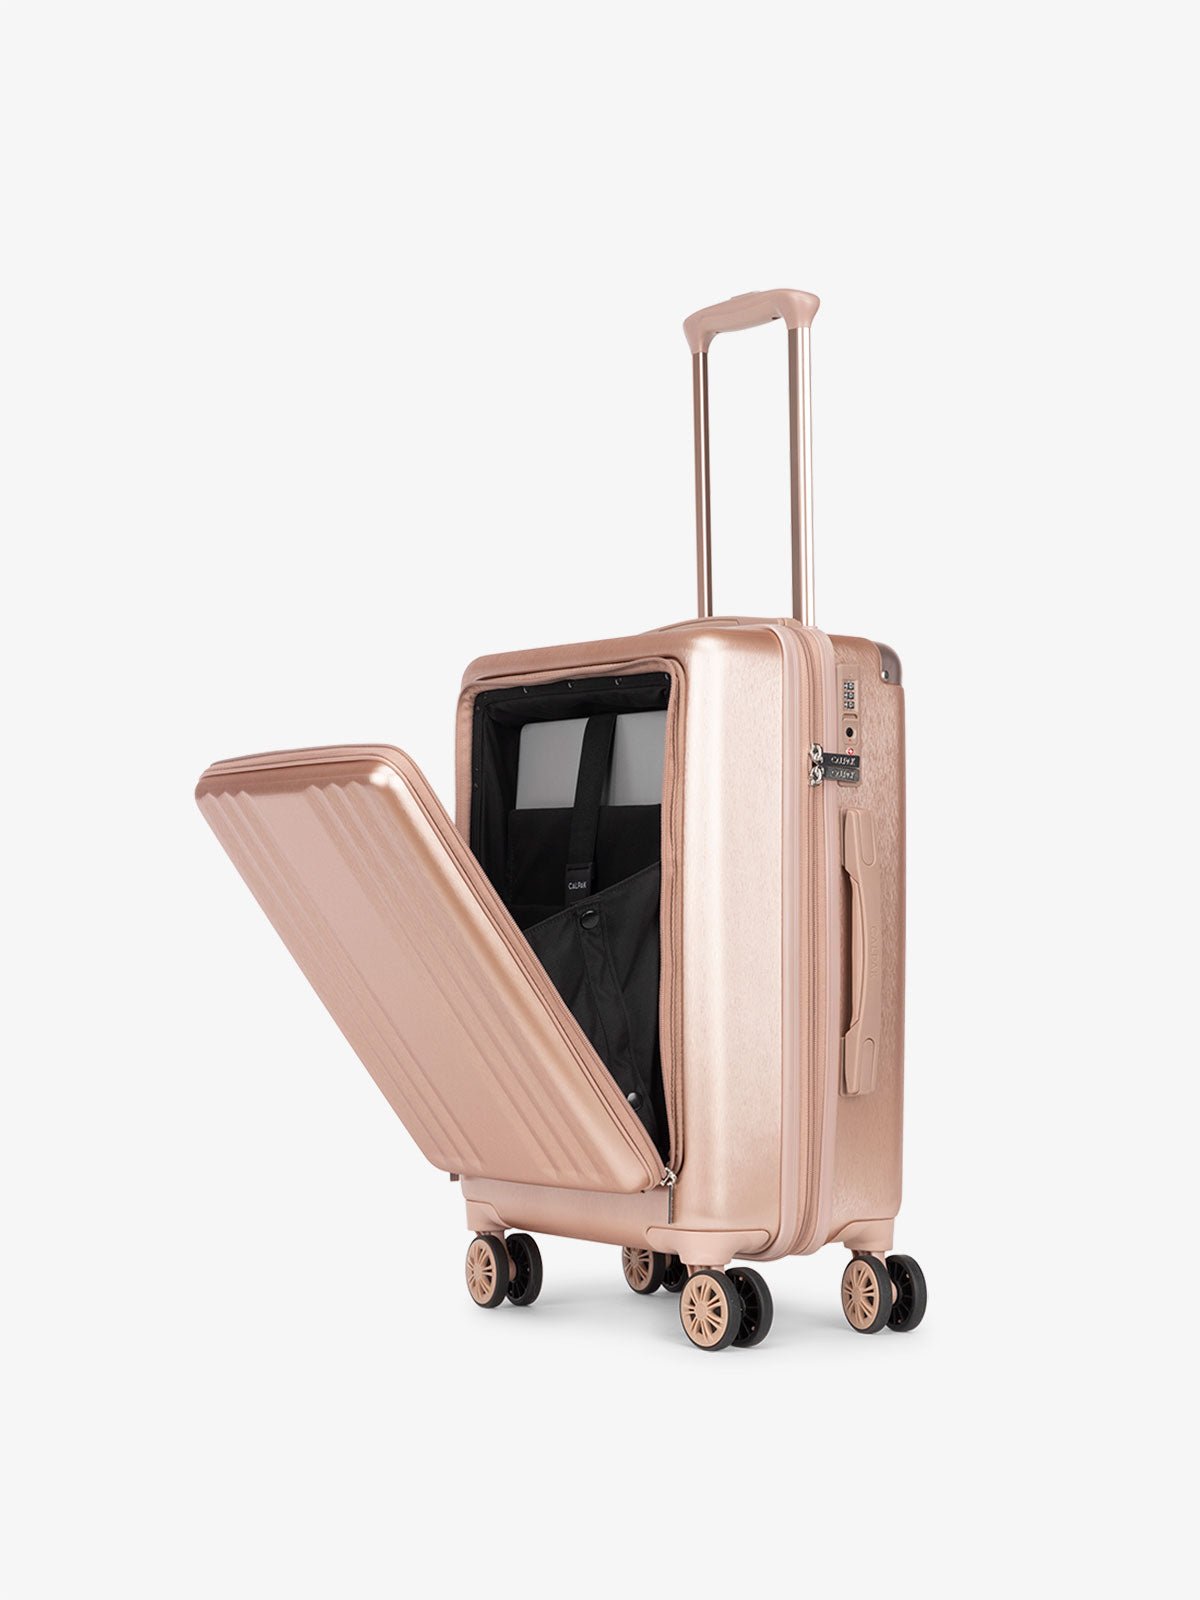 CALPAK Ambeur front pocket lightweight carry-on luggage in rose gold